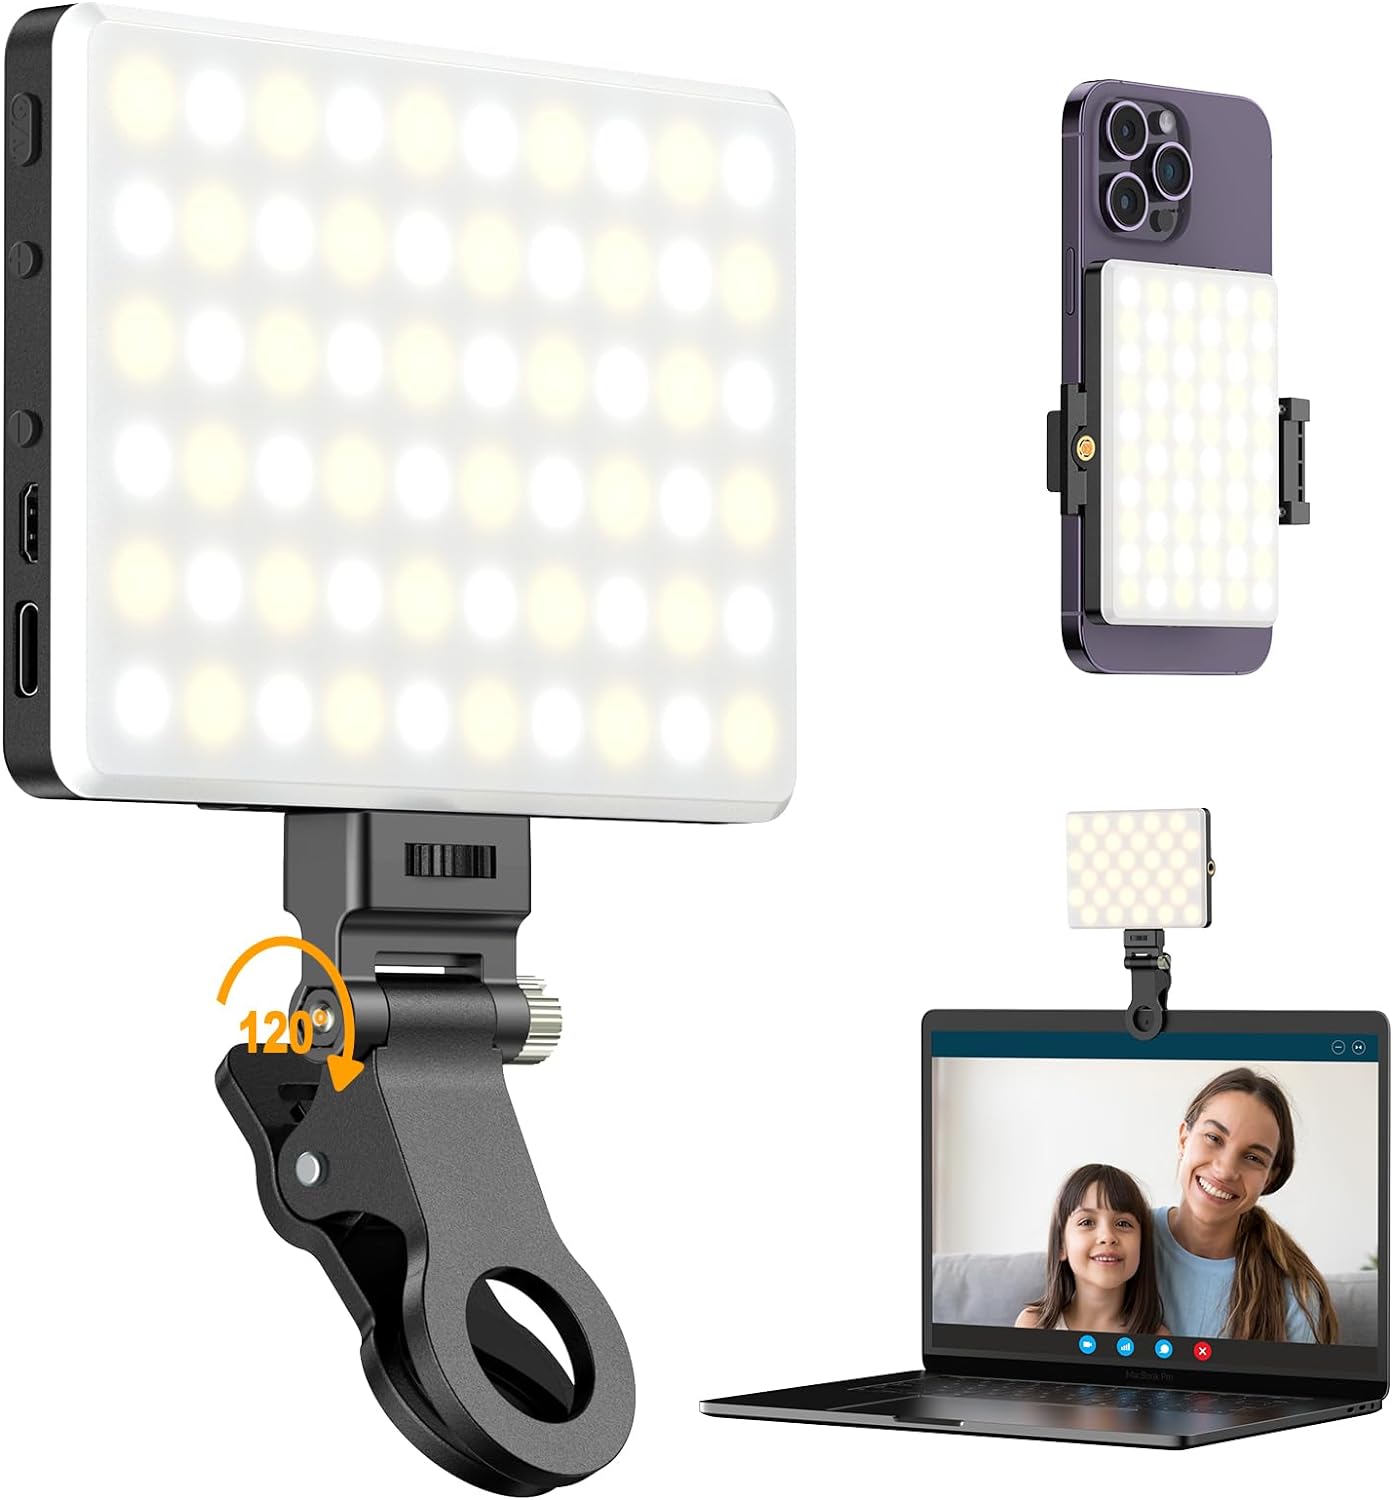 60 LED Selfie Light, Clip-on Rechargeable Phone Light with CRI 95+, 3 Color Temperatures, 10 Brightness Levels, Portable Video Light for Makeup, Selfies, TikTok, Vlog, Video Conference, Live Stream